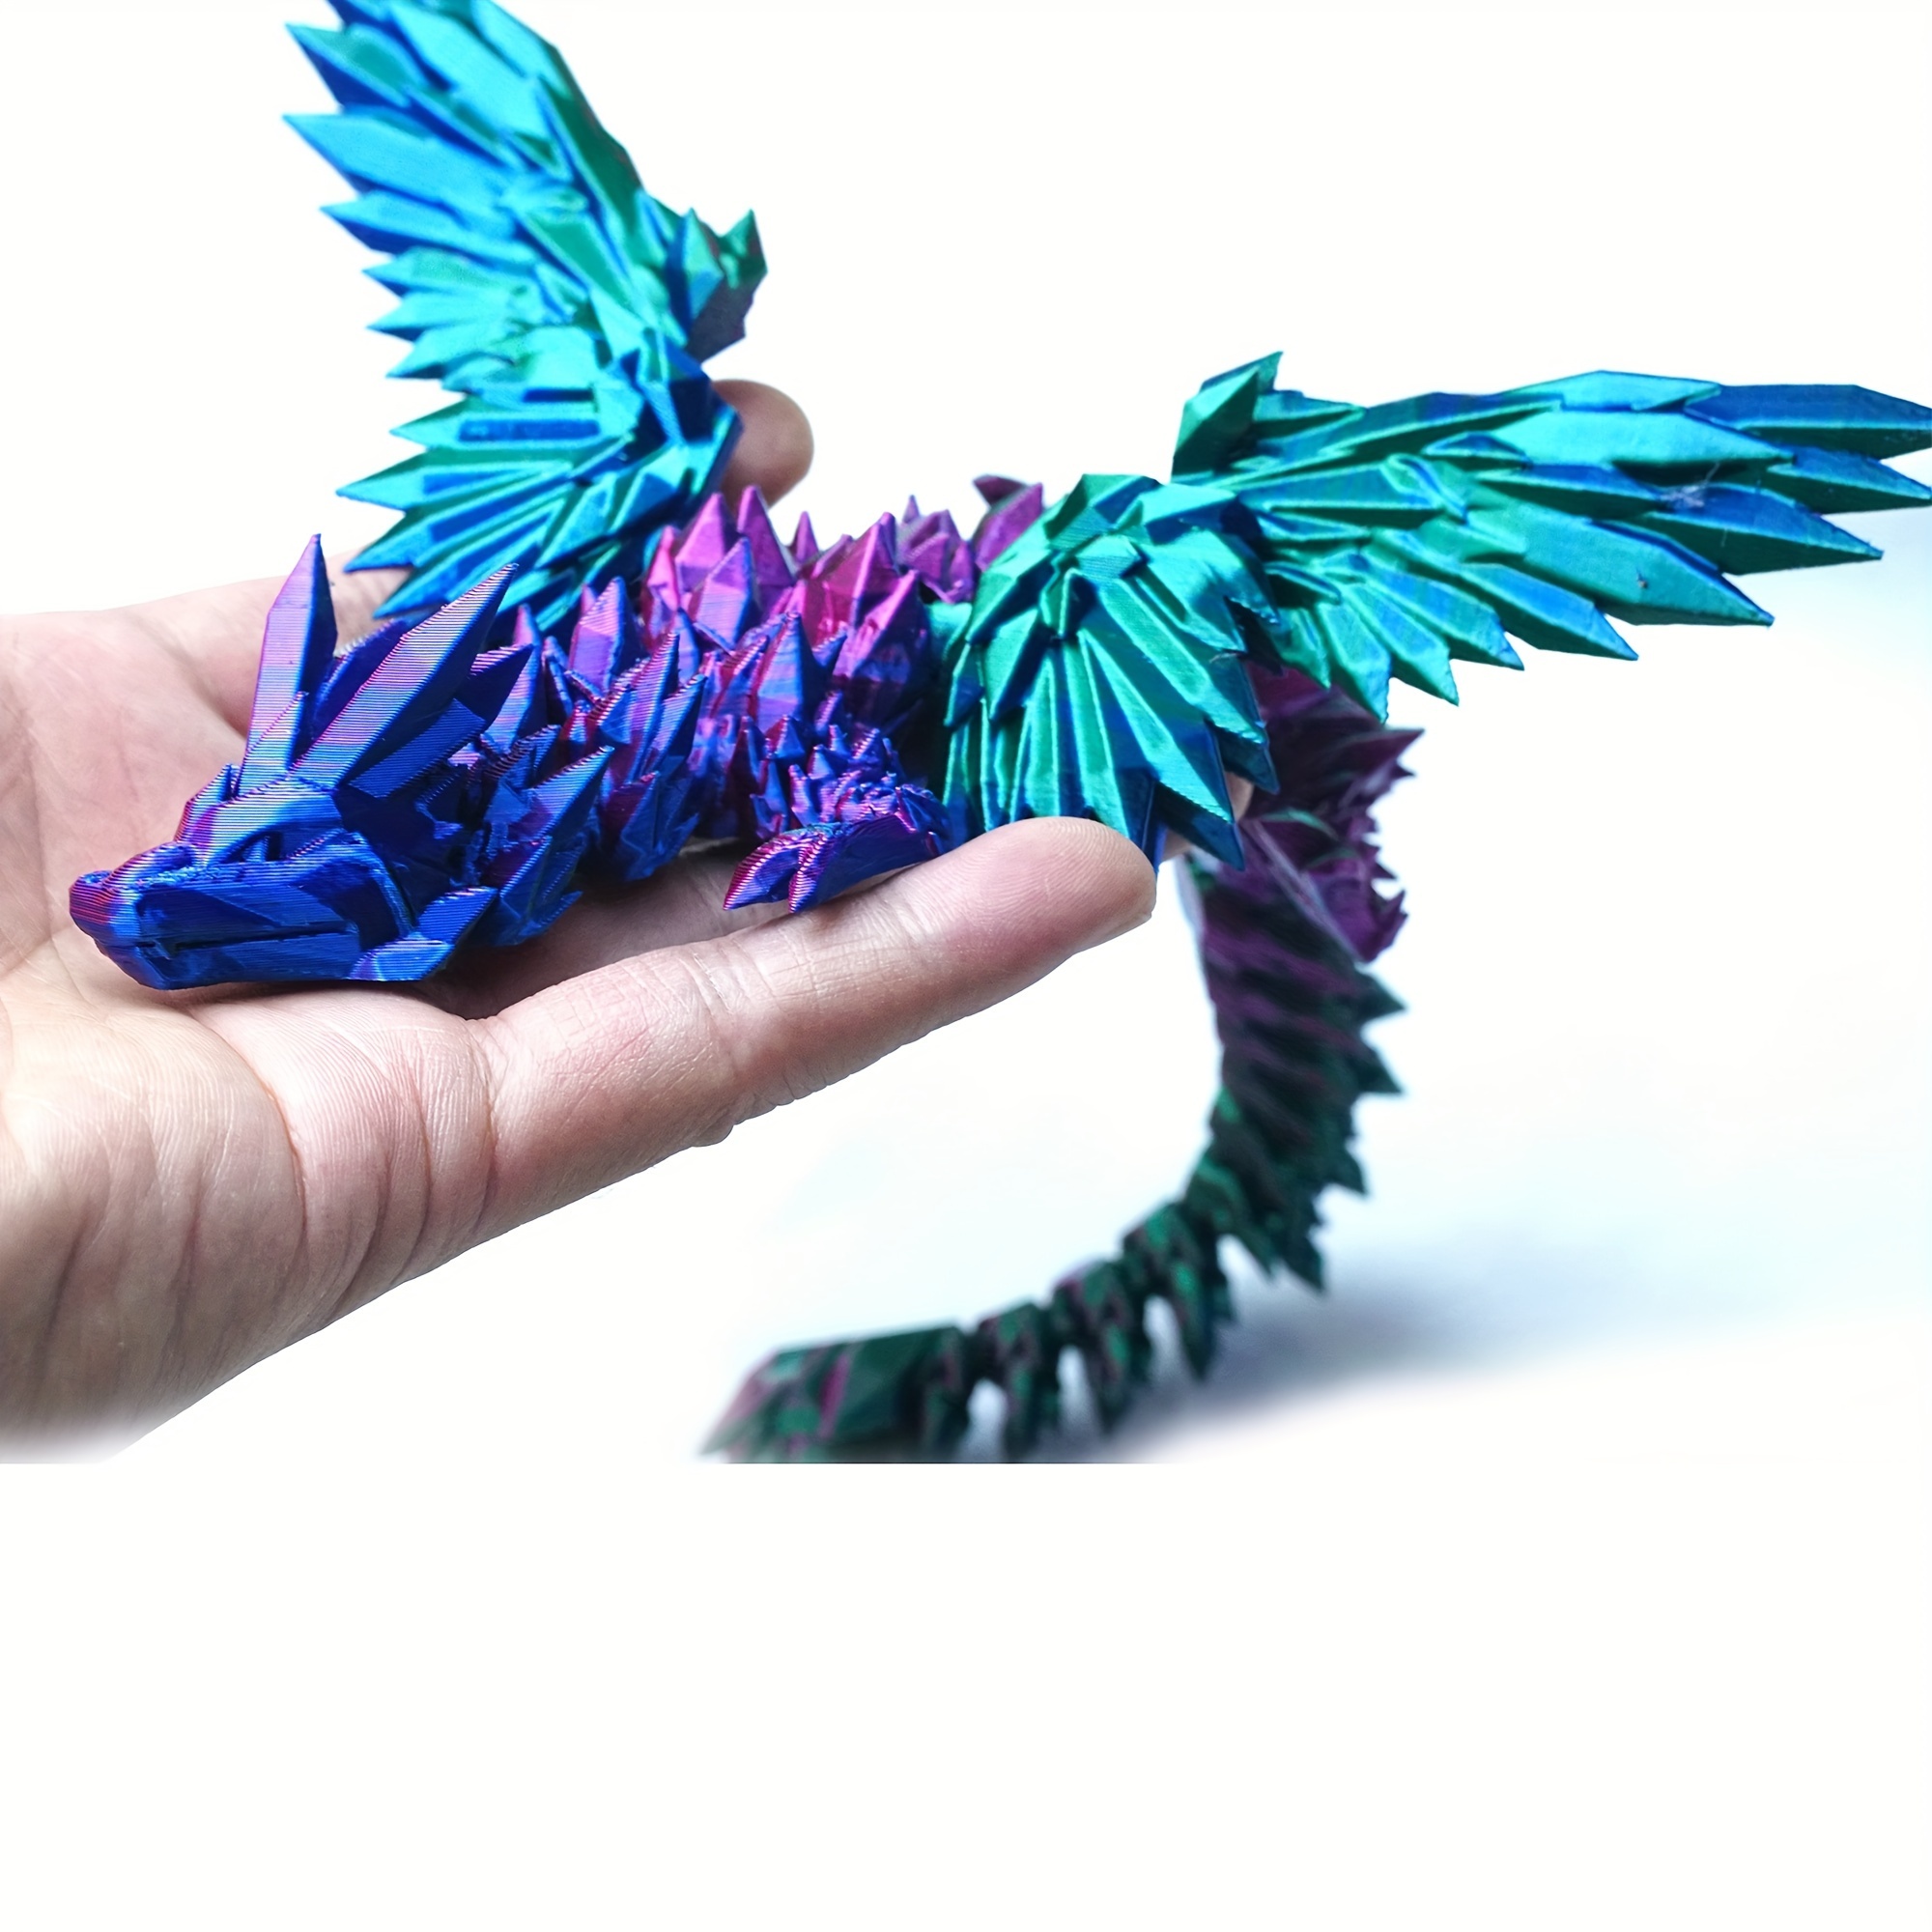 

3d Printed Pterosaur Figurine - Flexible Joints, Articulated Dragon Model For Collectors & Decor, Perfect For Home, Office, And Car